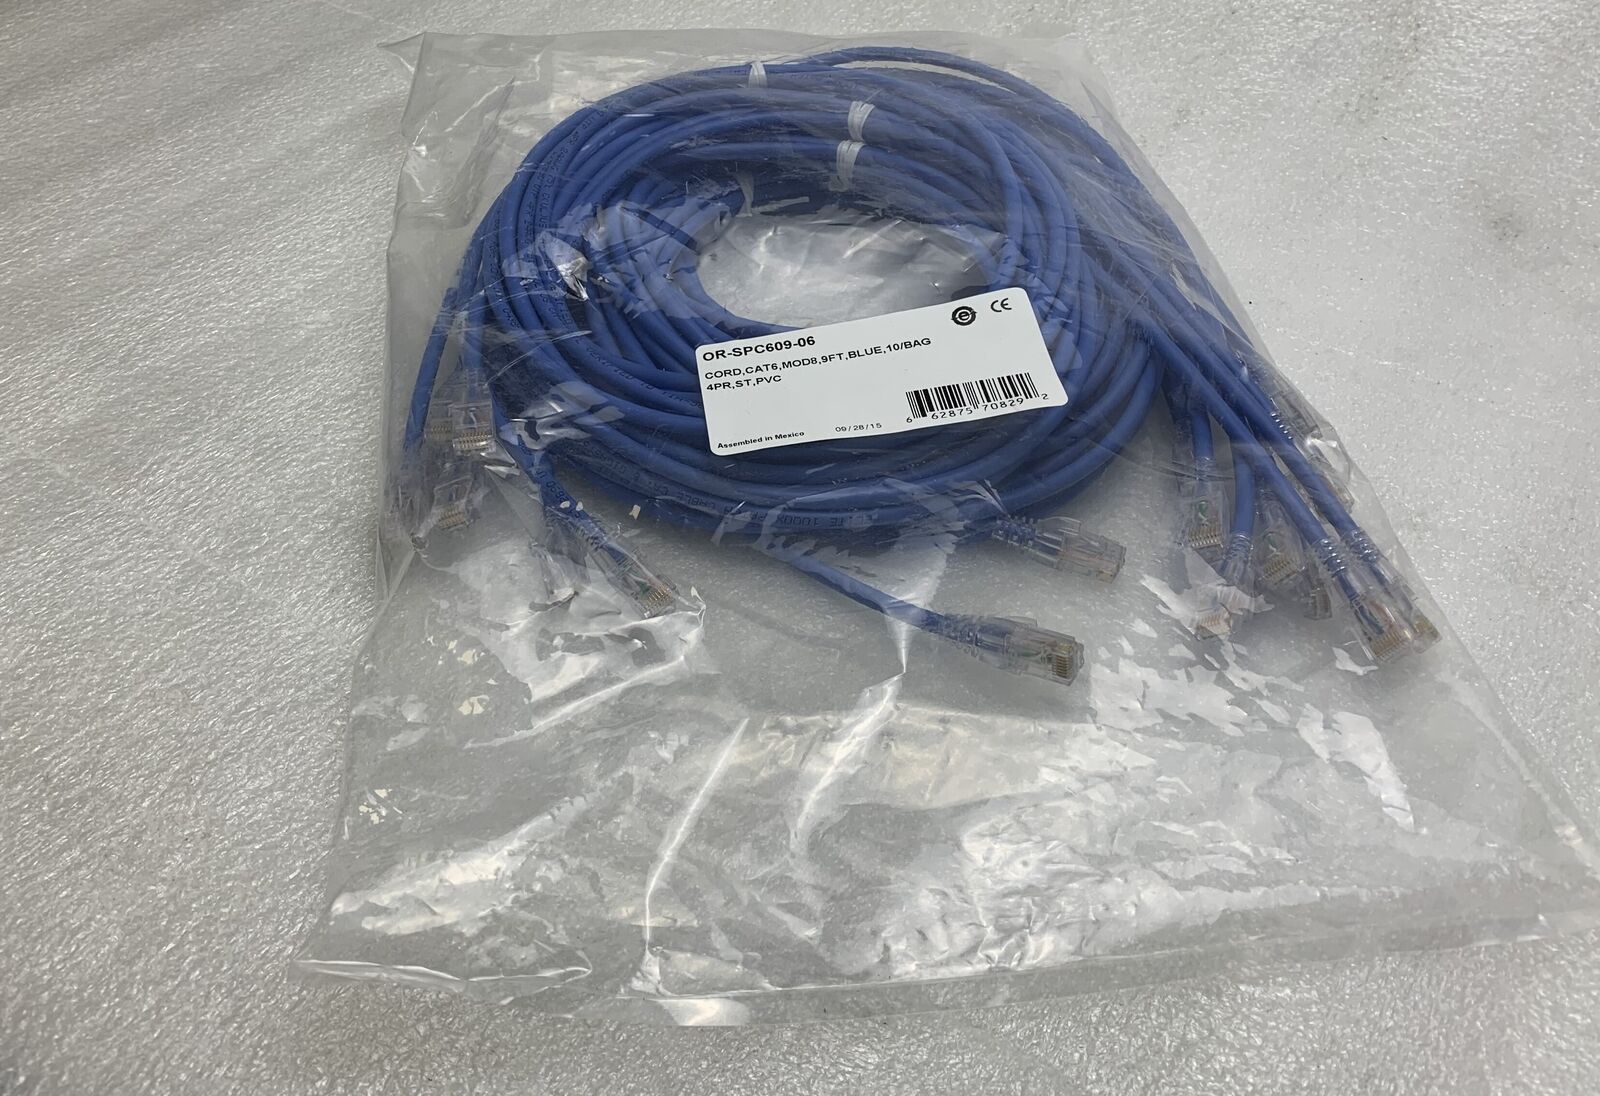 Bag of 10 Ortronics OR-SPC609-06 Cat6 MOD8 9ft RJ45 Ethernet Patch Network Cord